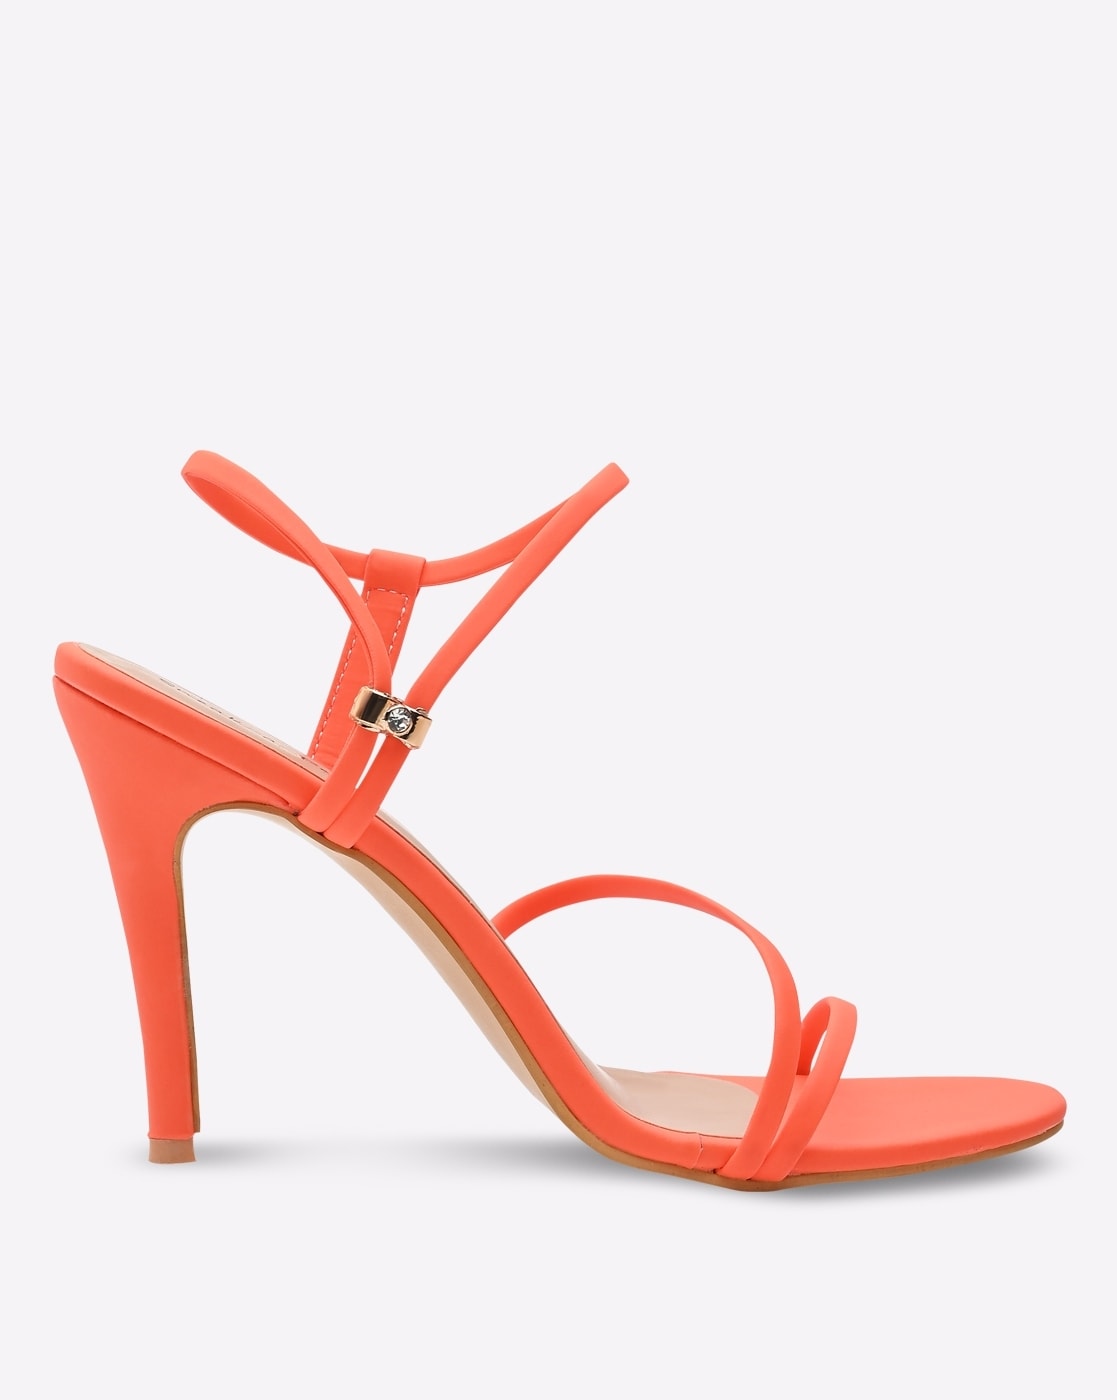 Buy Street Style Store Chic orange strappy heels for women and girls  stylish (numeric_6) at Amazon.in